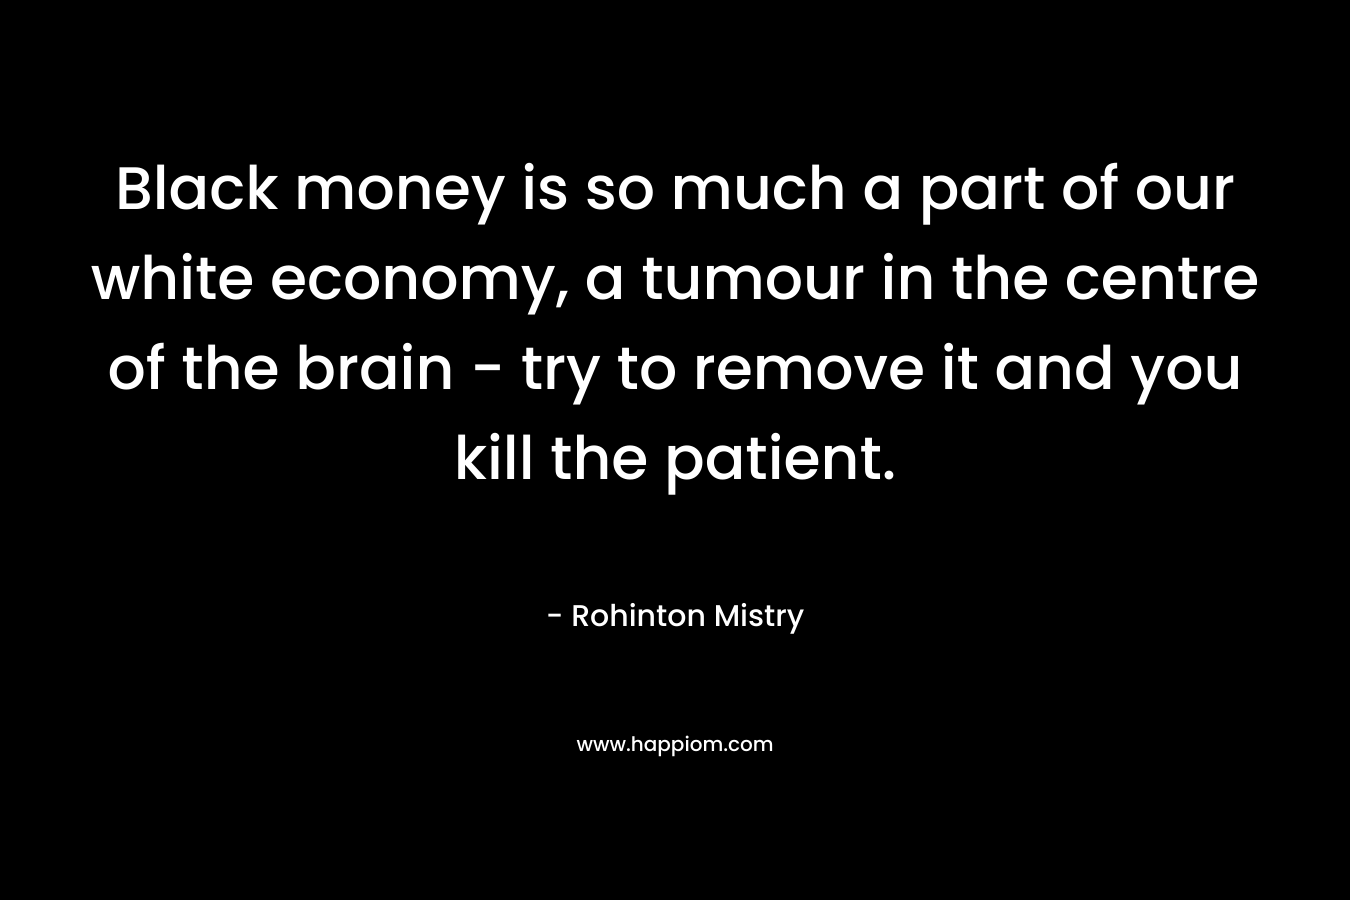 Black money is so much a part of our white economy, a tumour in the centre of the brain – try to remove it and you kill the patient. – Rohinton Mistry